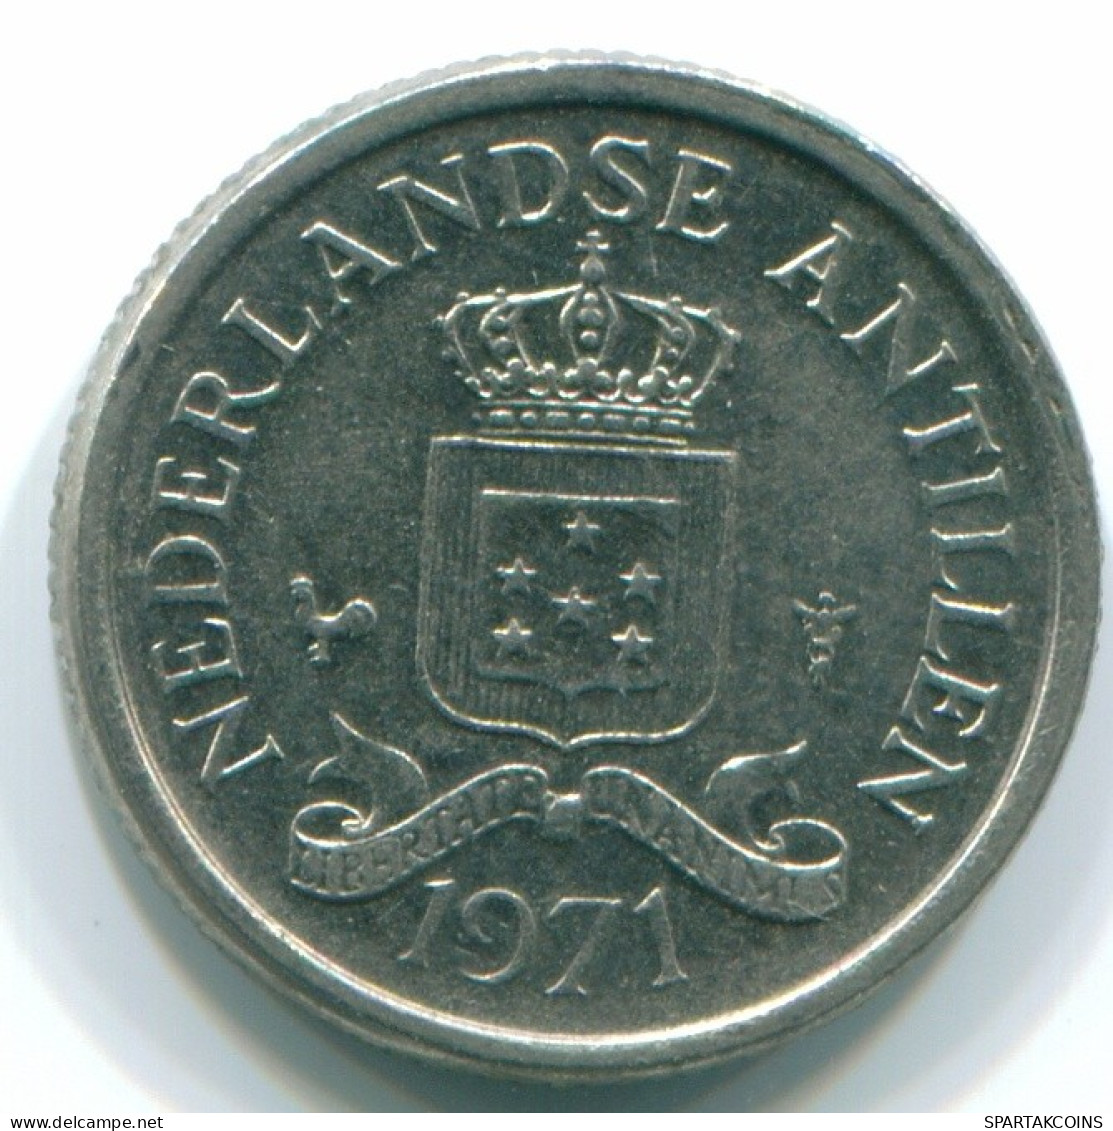 10 CENTS 1971 NETHERLANDS ANTILLES Nickel Colonial Coin #S13432.U.A - Netherlands Antilles